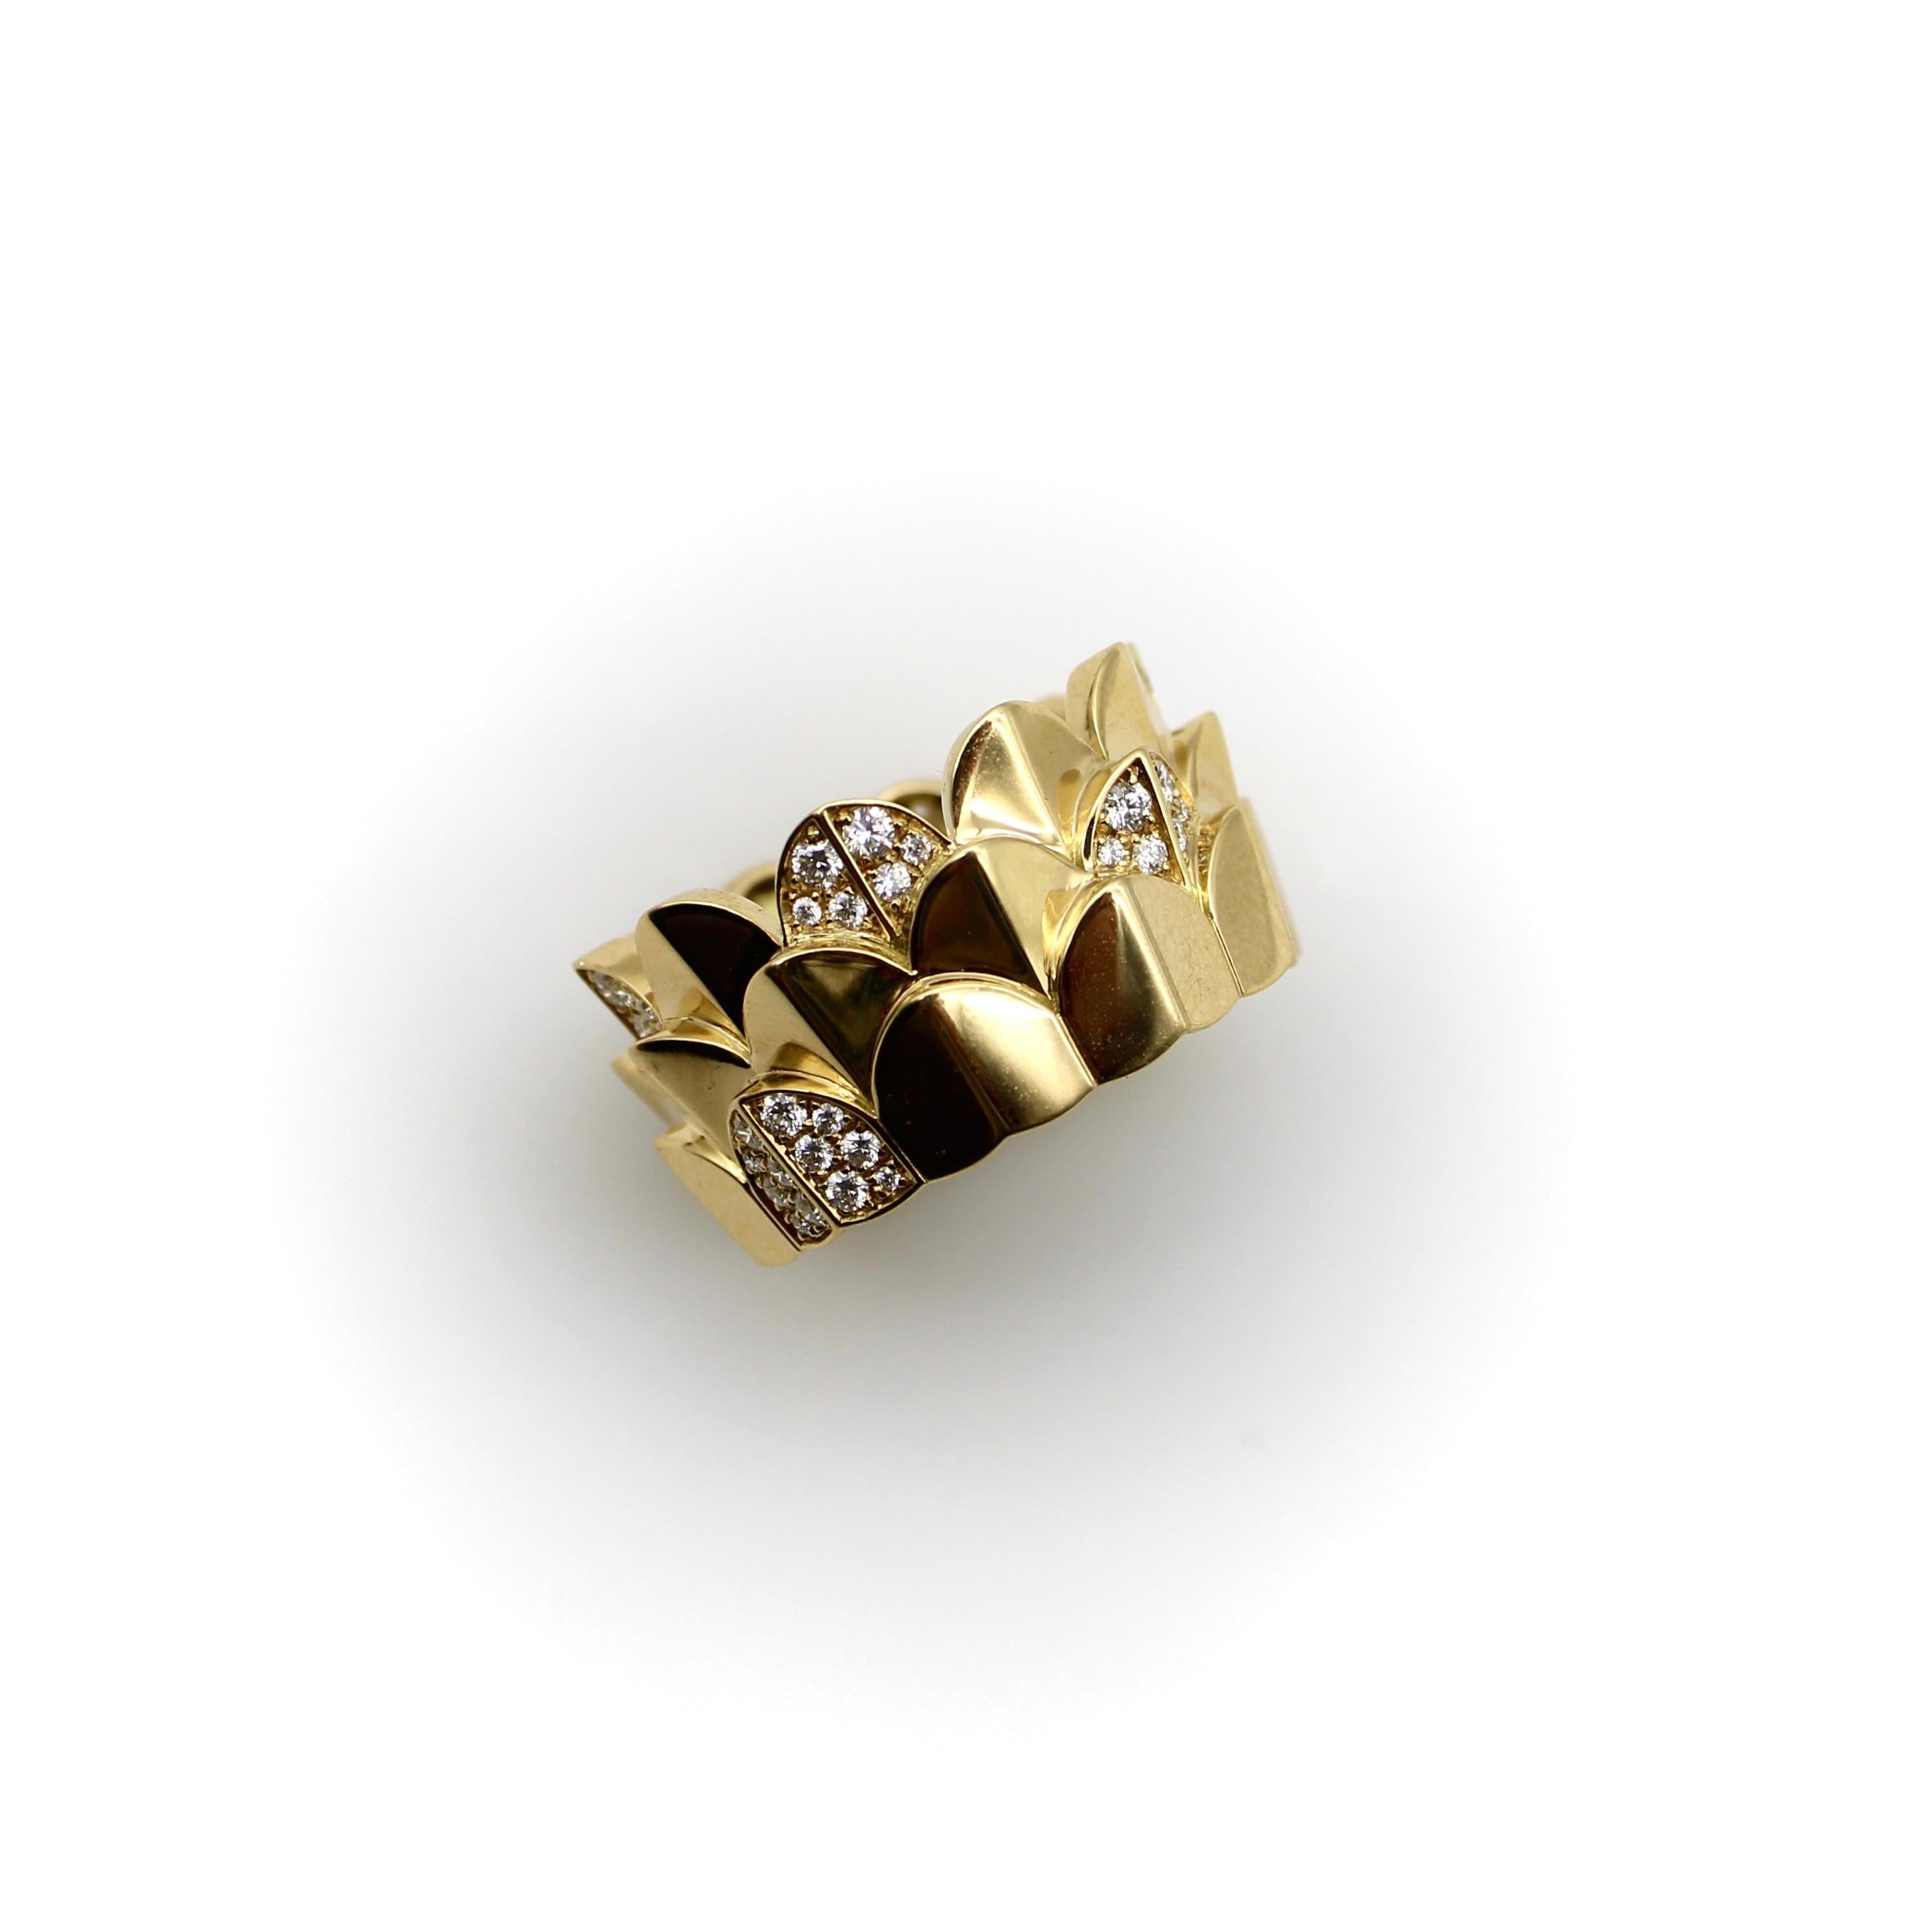 This 18k gold and diamond pave band ring is befitting of a queen! The triple arc motif is an iconic Fred of Paris design, with three layered bands reminiscent of flower petals or the scales of an aquatic creature. Within the the motif, some arcs